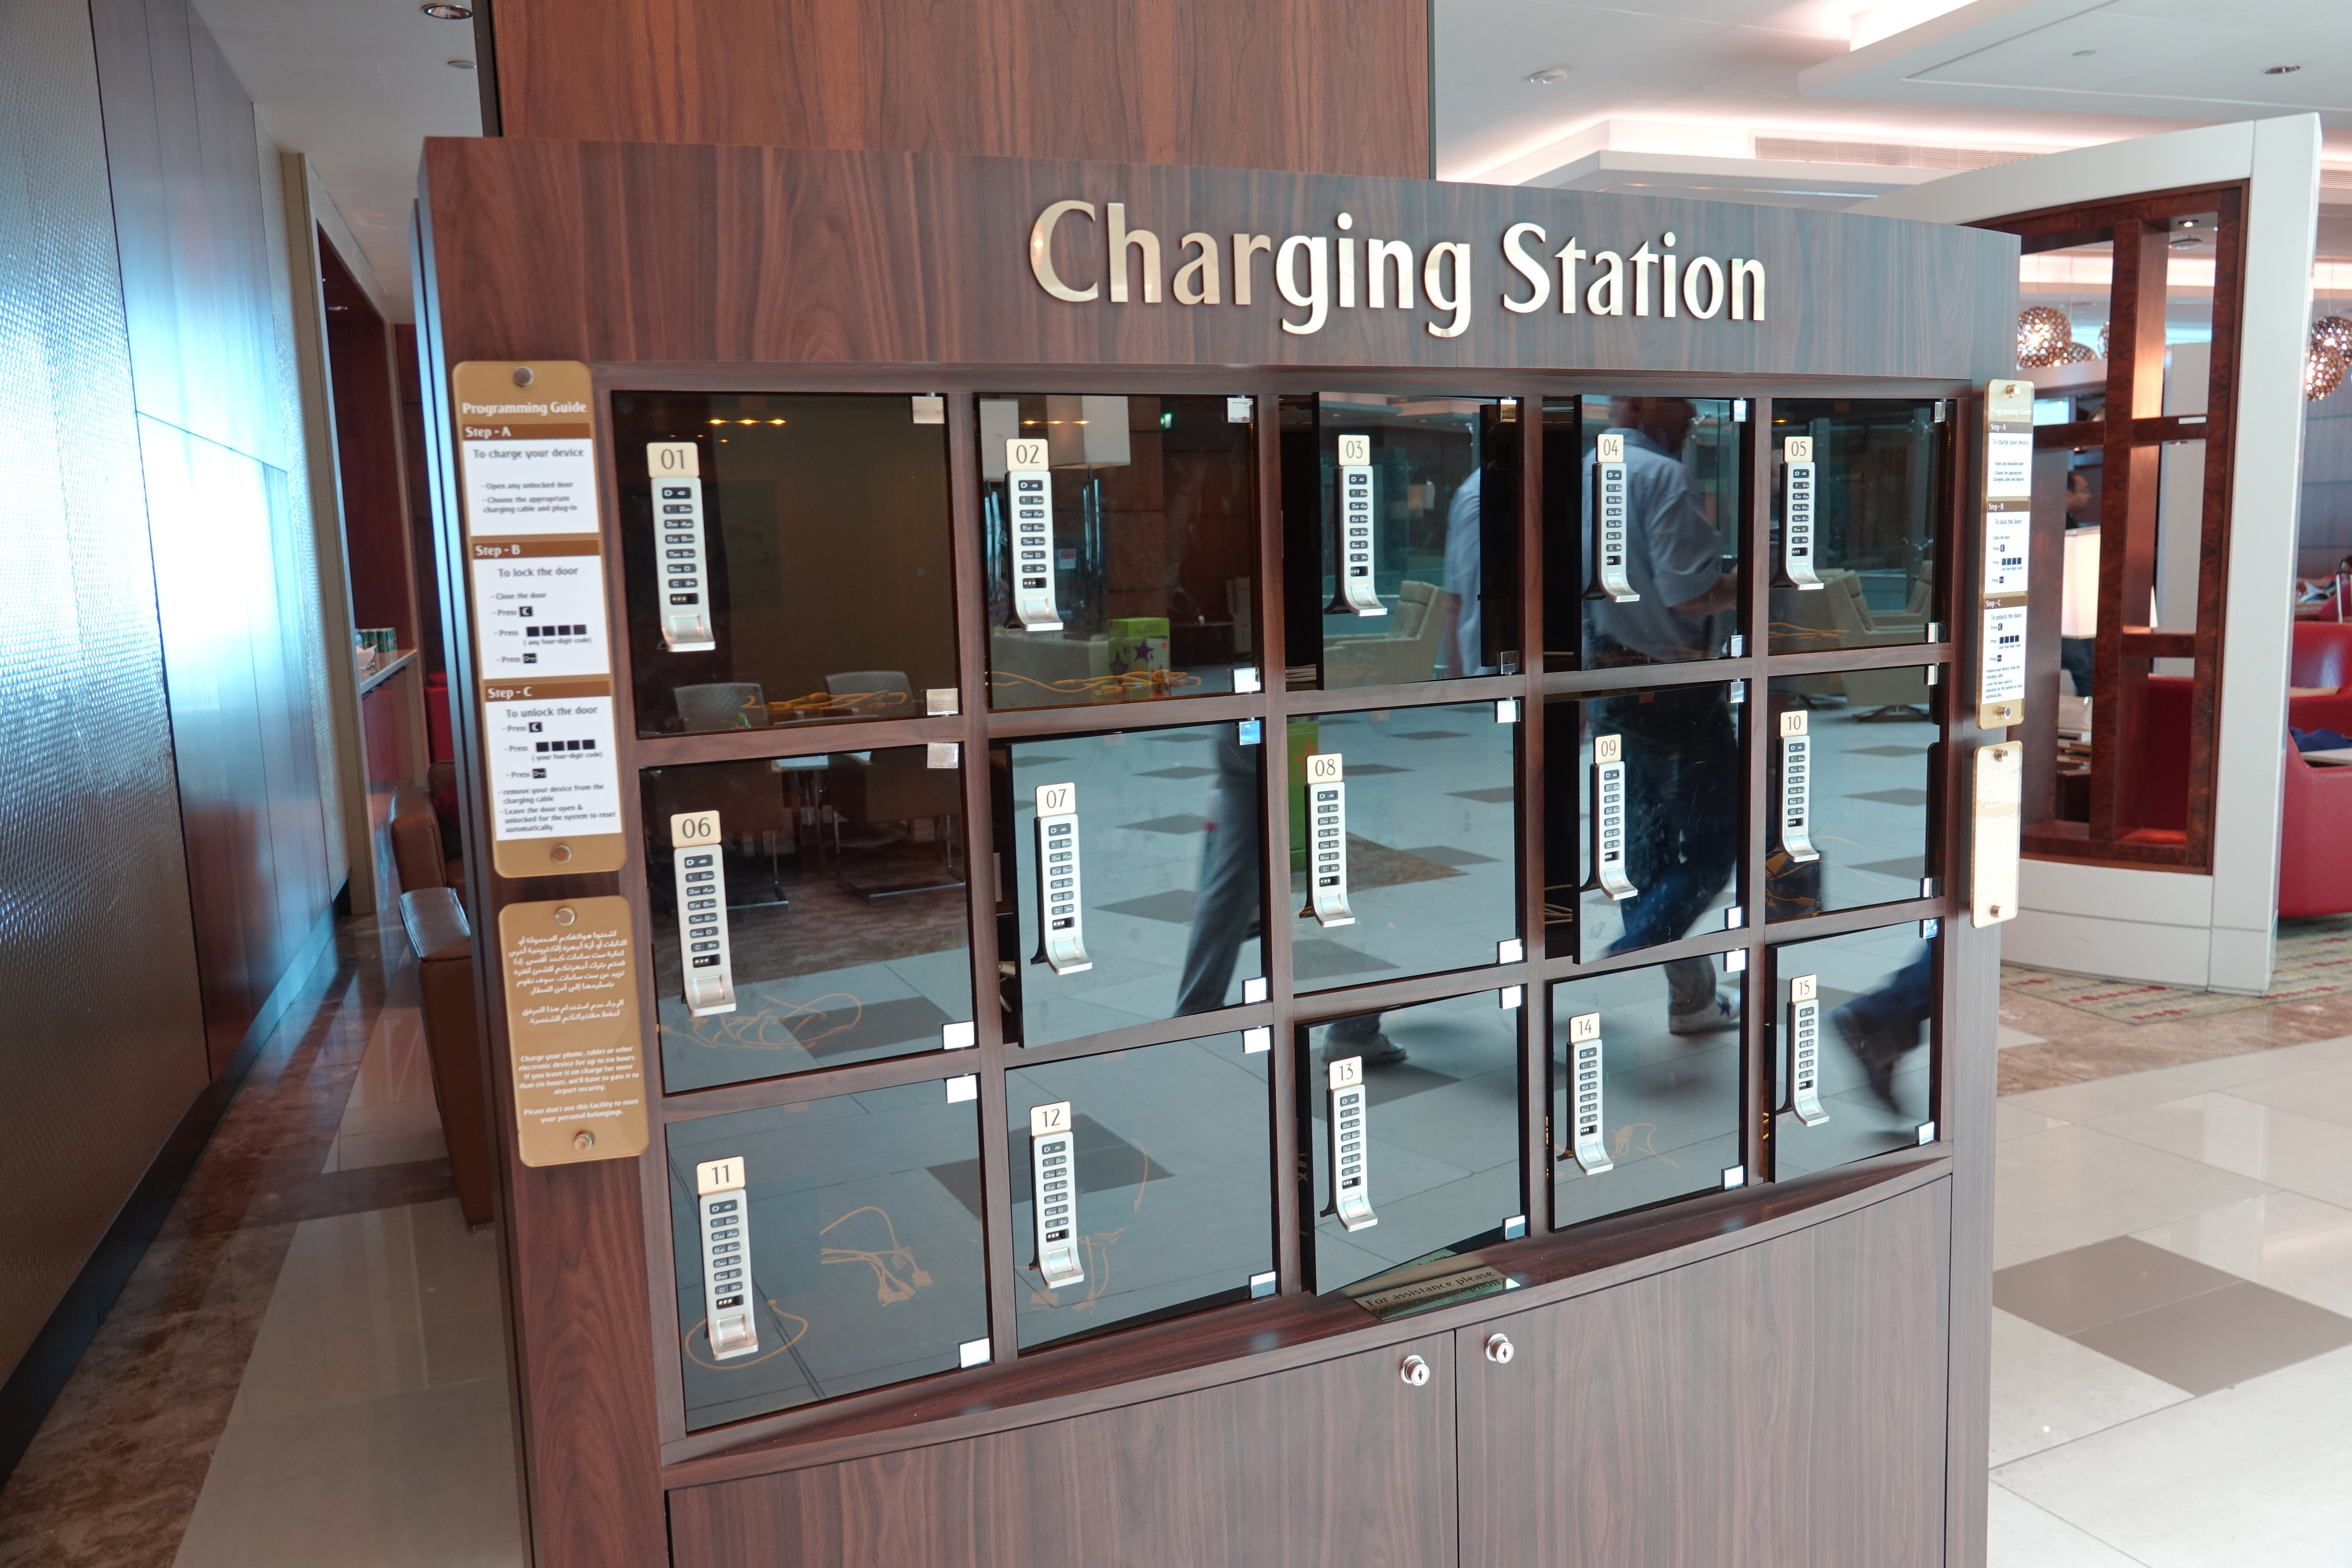 a charging station with many glass panels